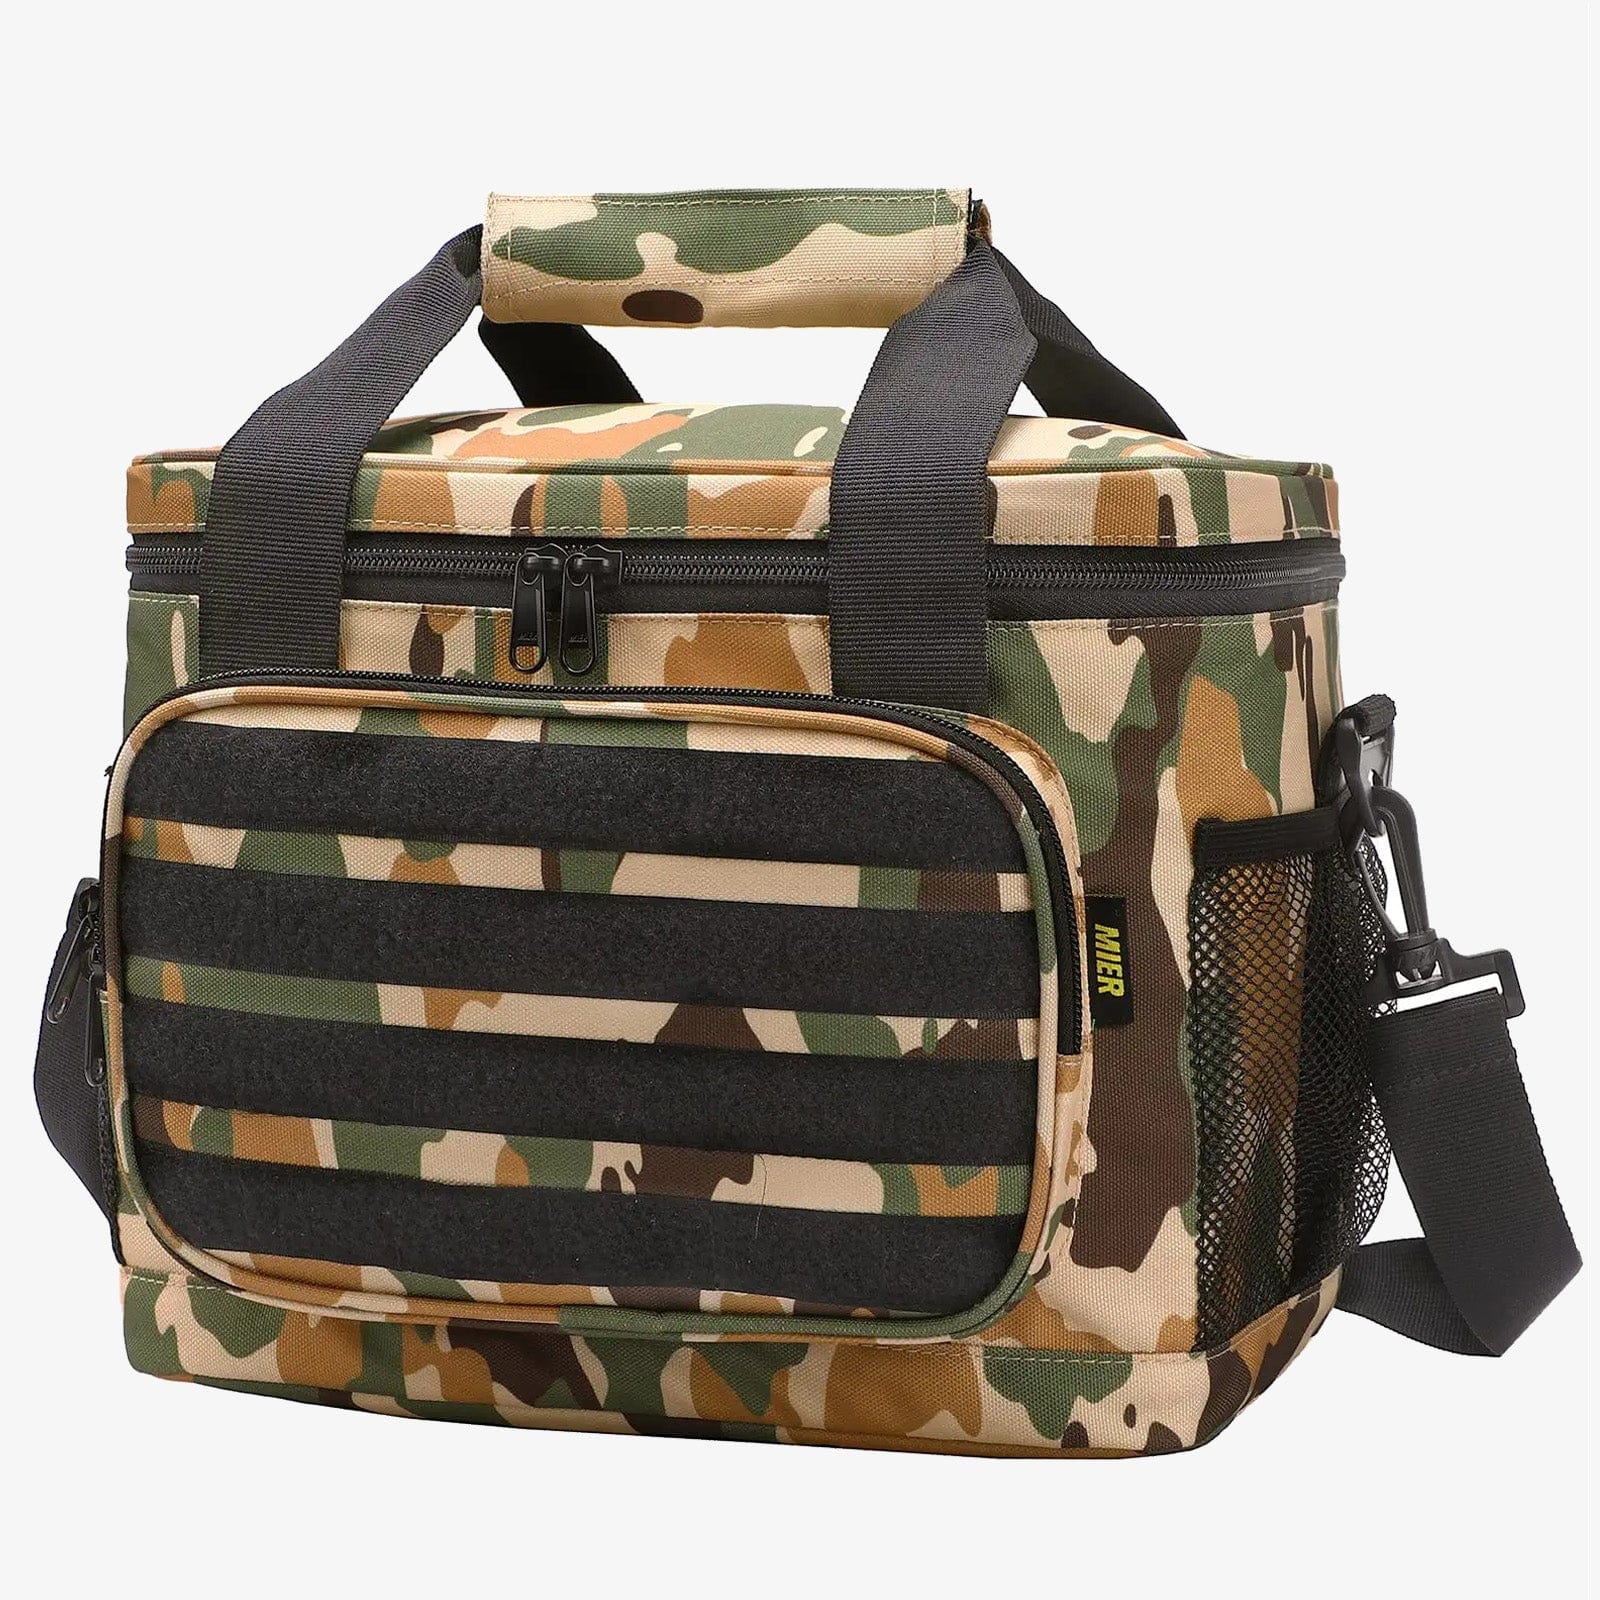 MIER Large Insulated Lunch Bag Meal Prep Cooler Tote, Camo